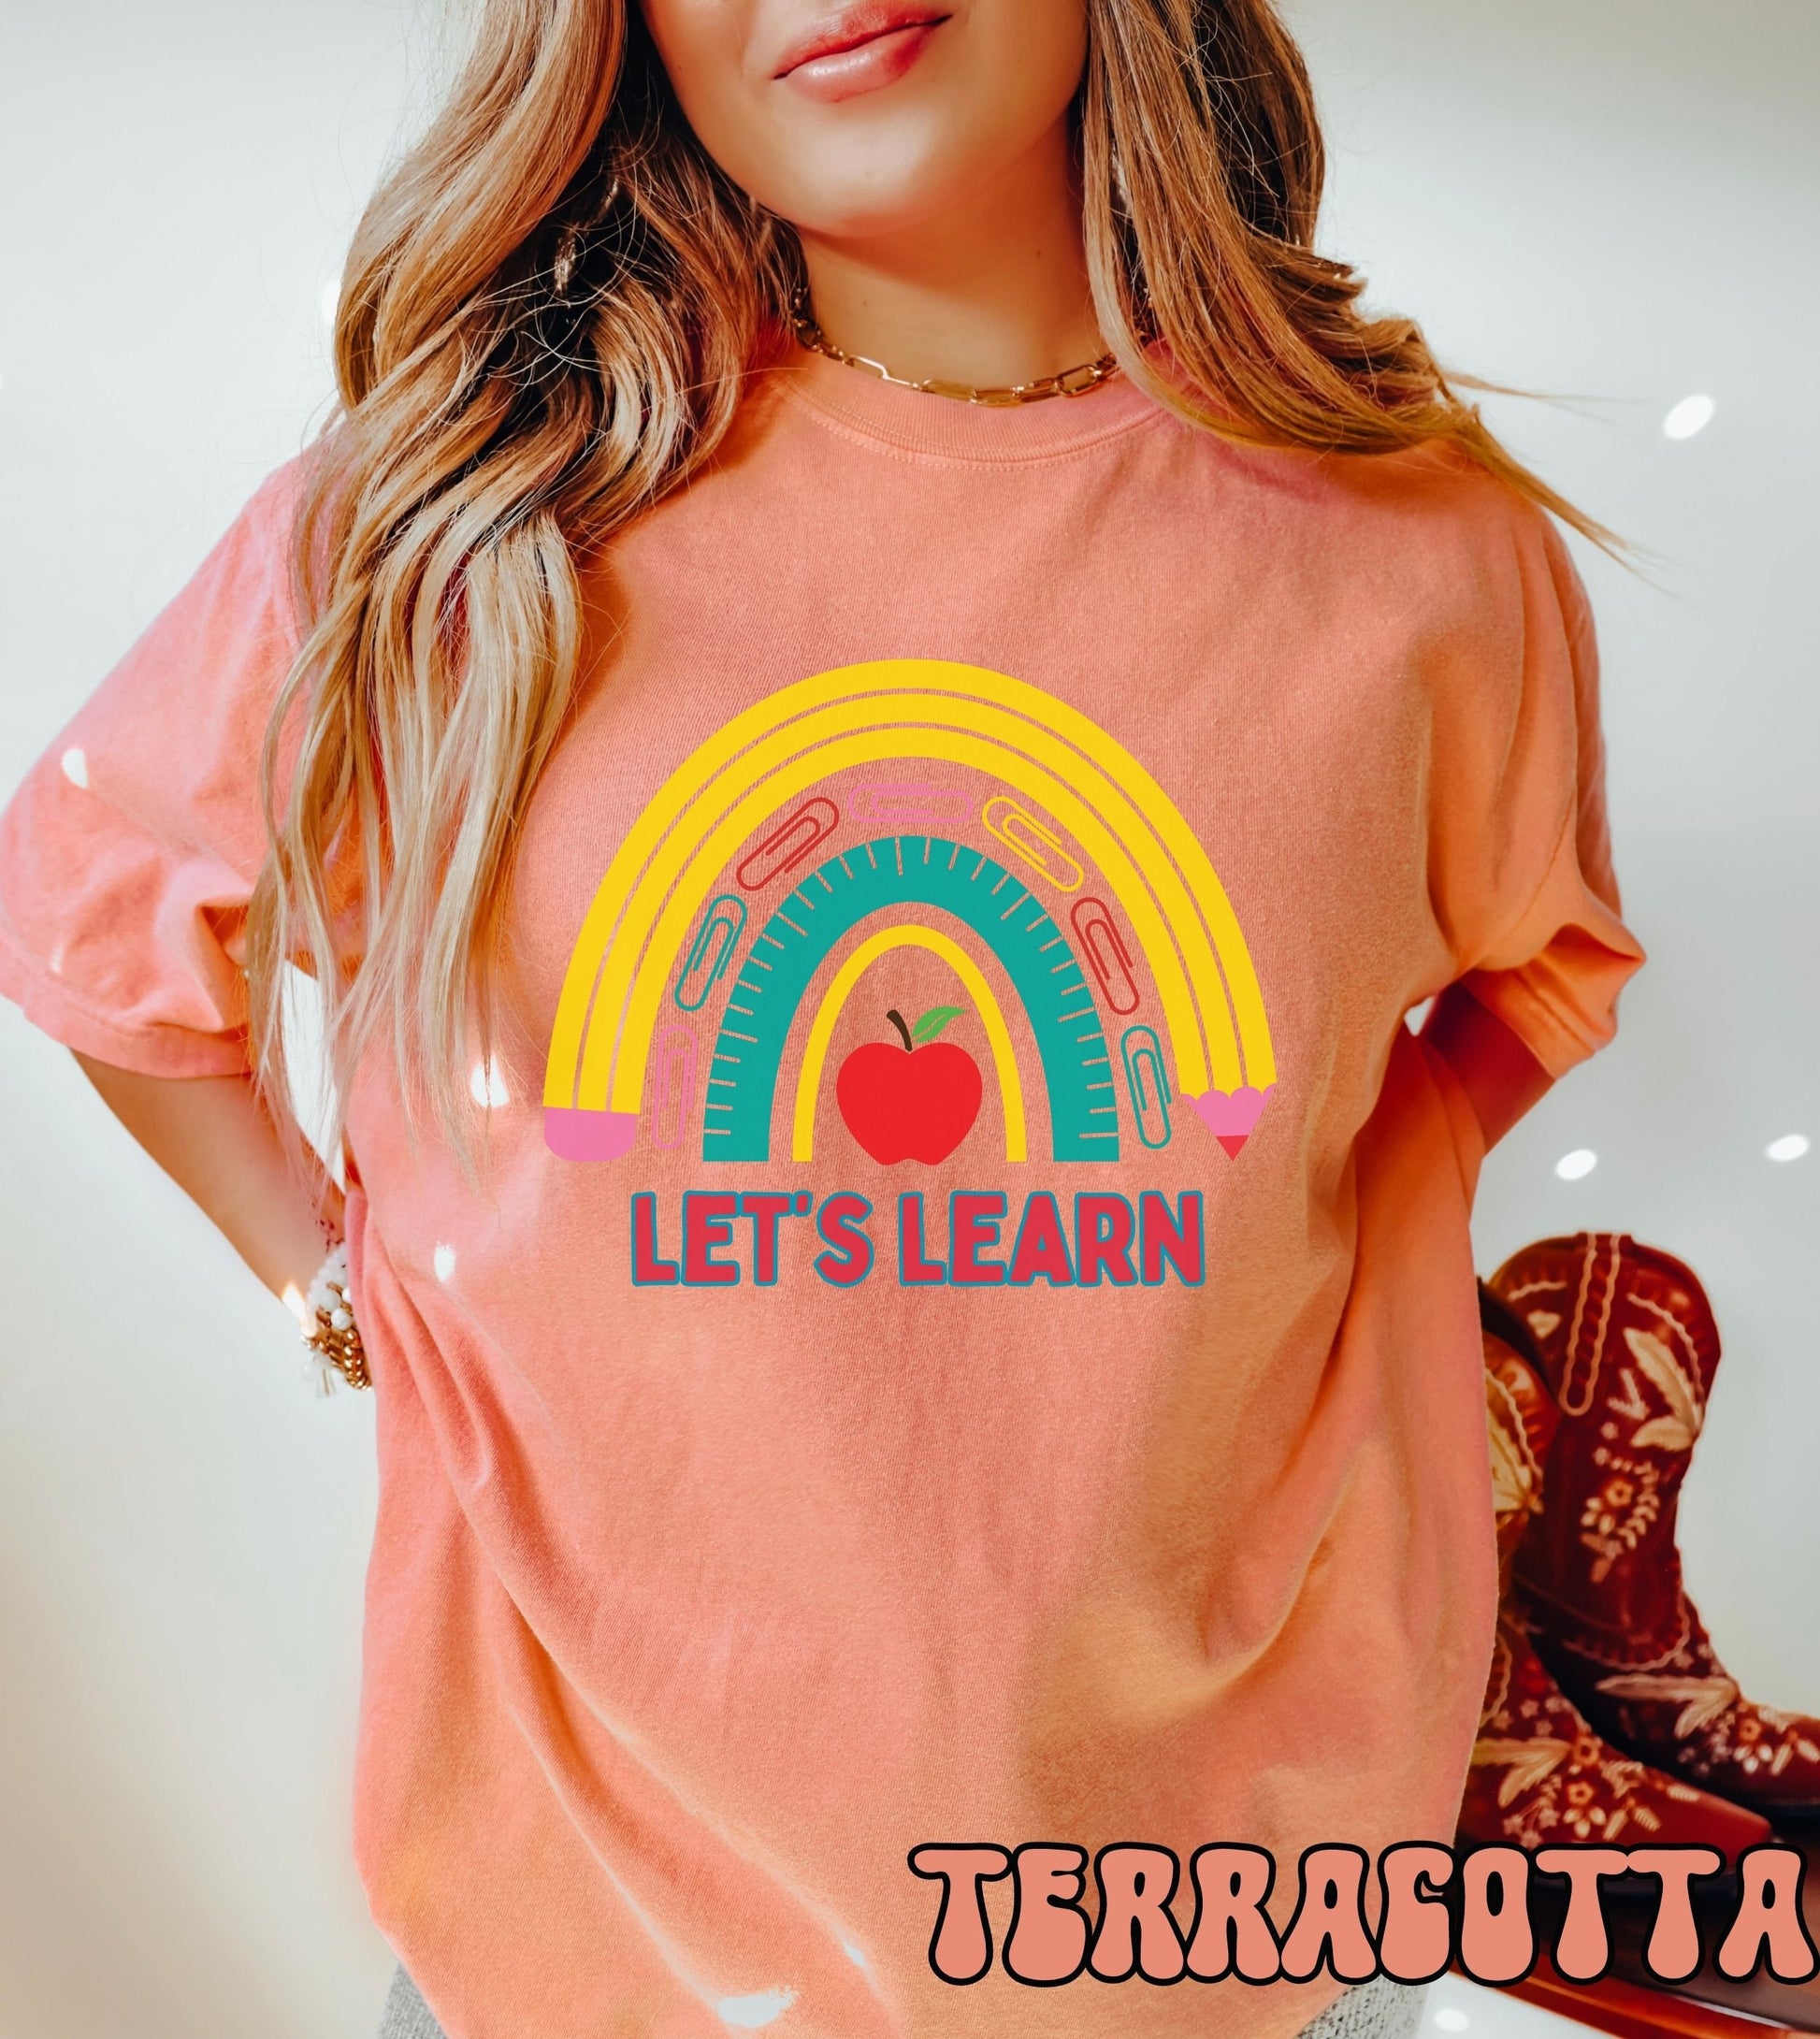 The Let's Learn Teacher Shirt, Gift This to Your Favorite Difference Maker!